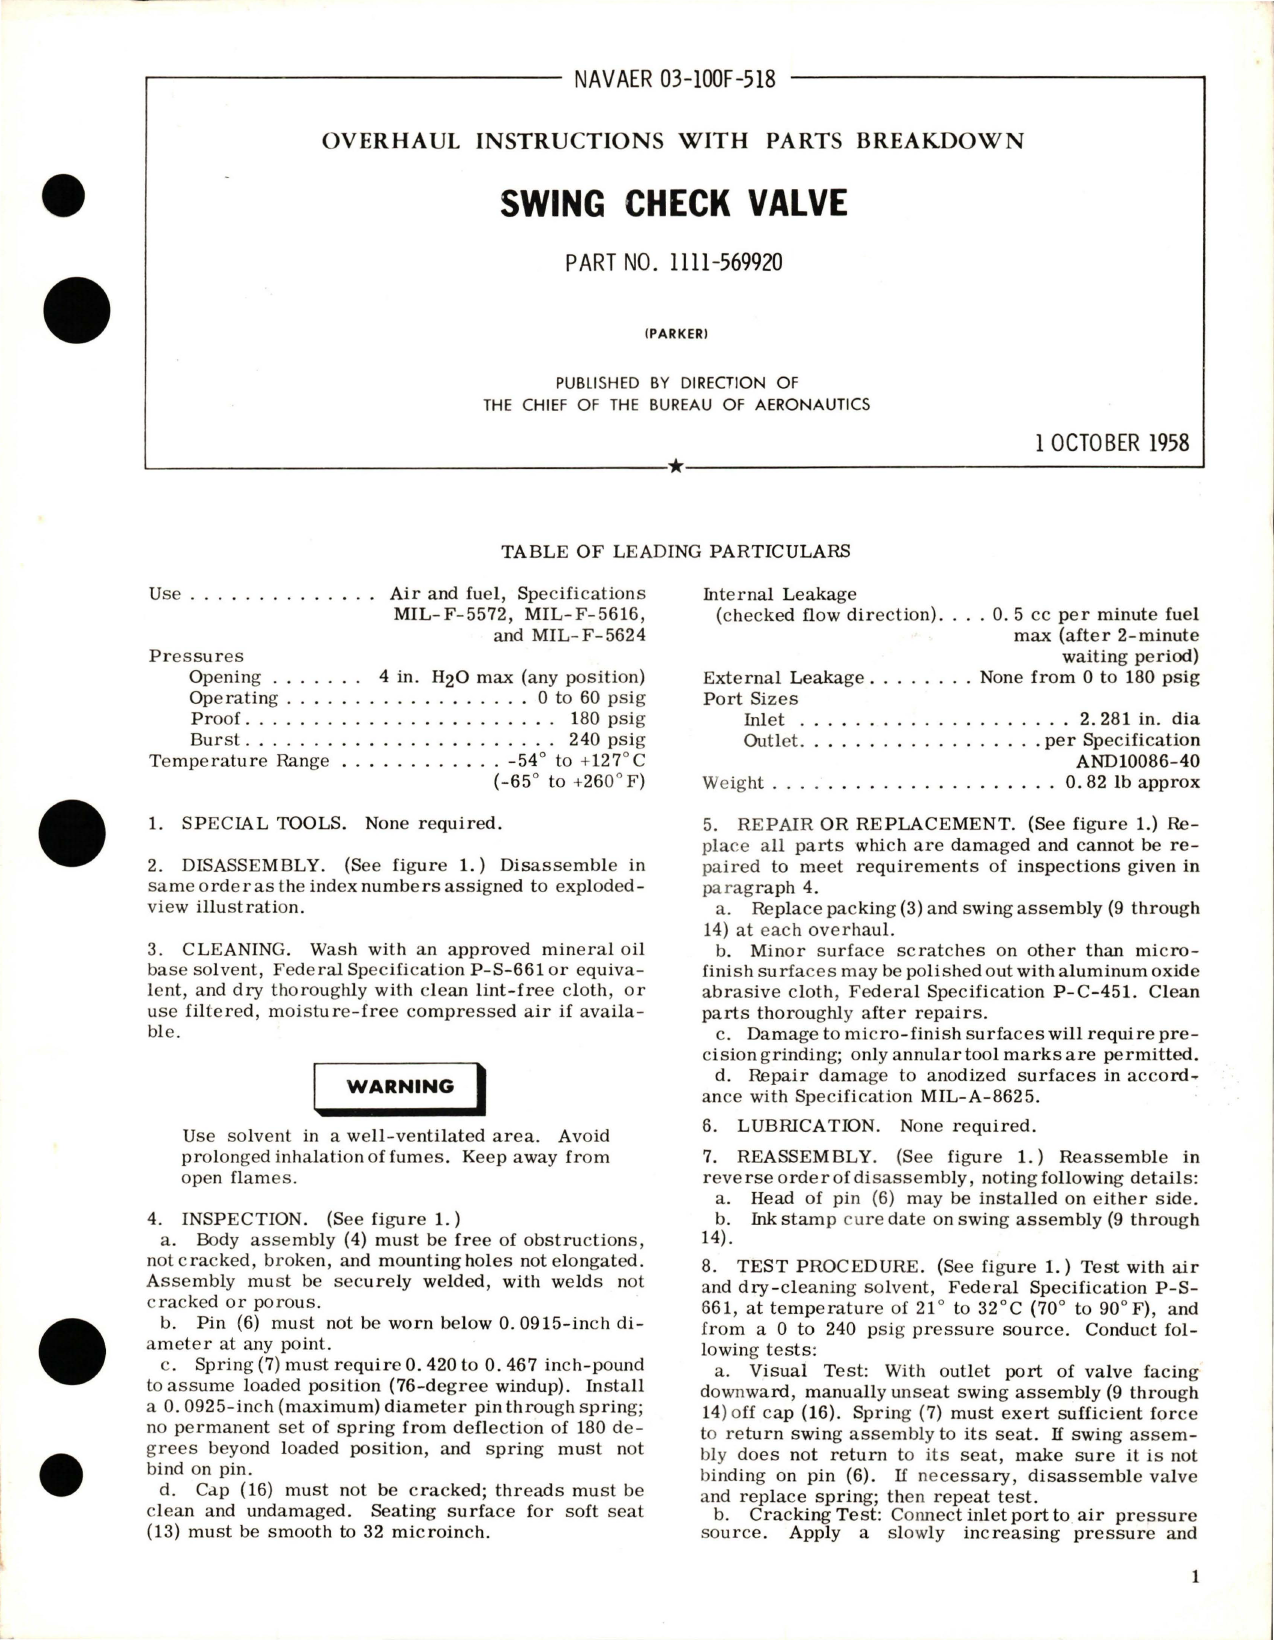 Sample page 1 from AirCorps Library document: Overhaul Instructions with Parts Breakdown for Swing Check Valve - Part 1111-569920